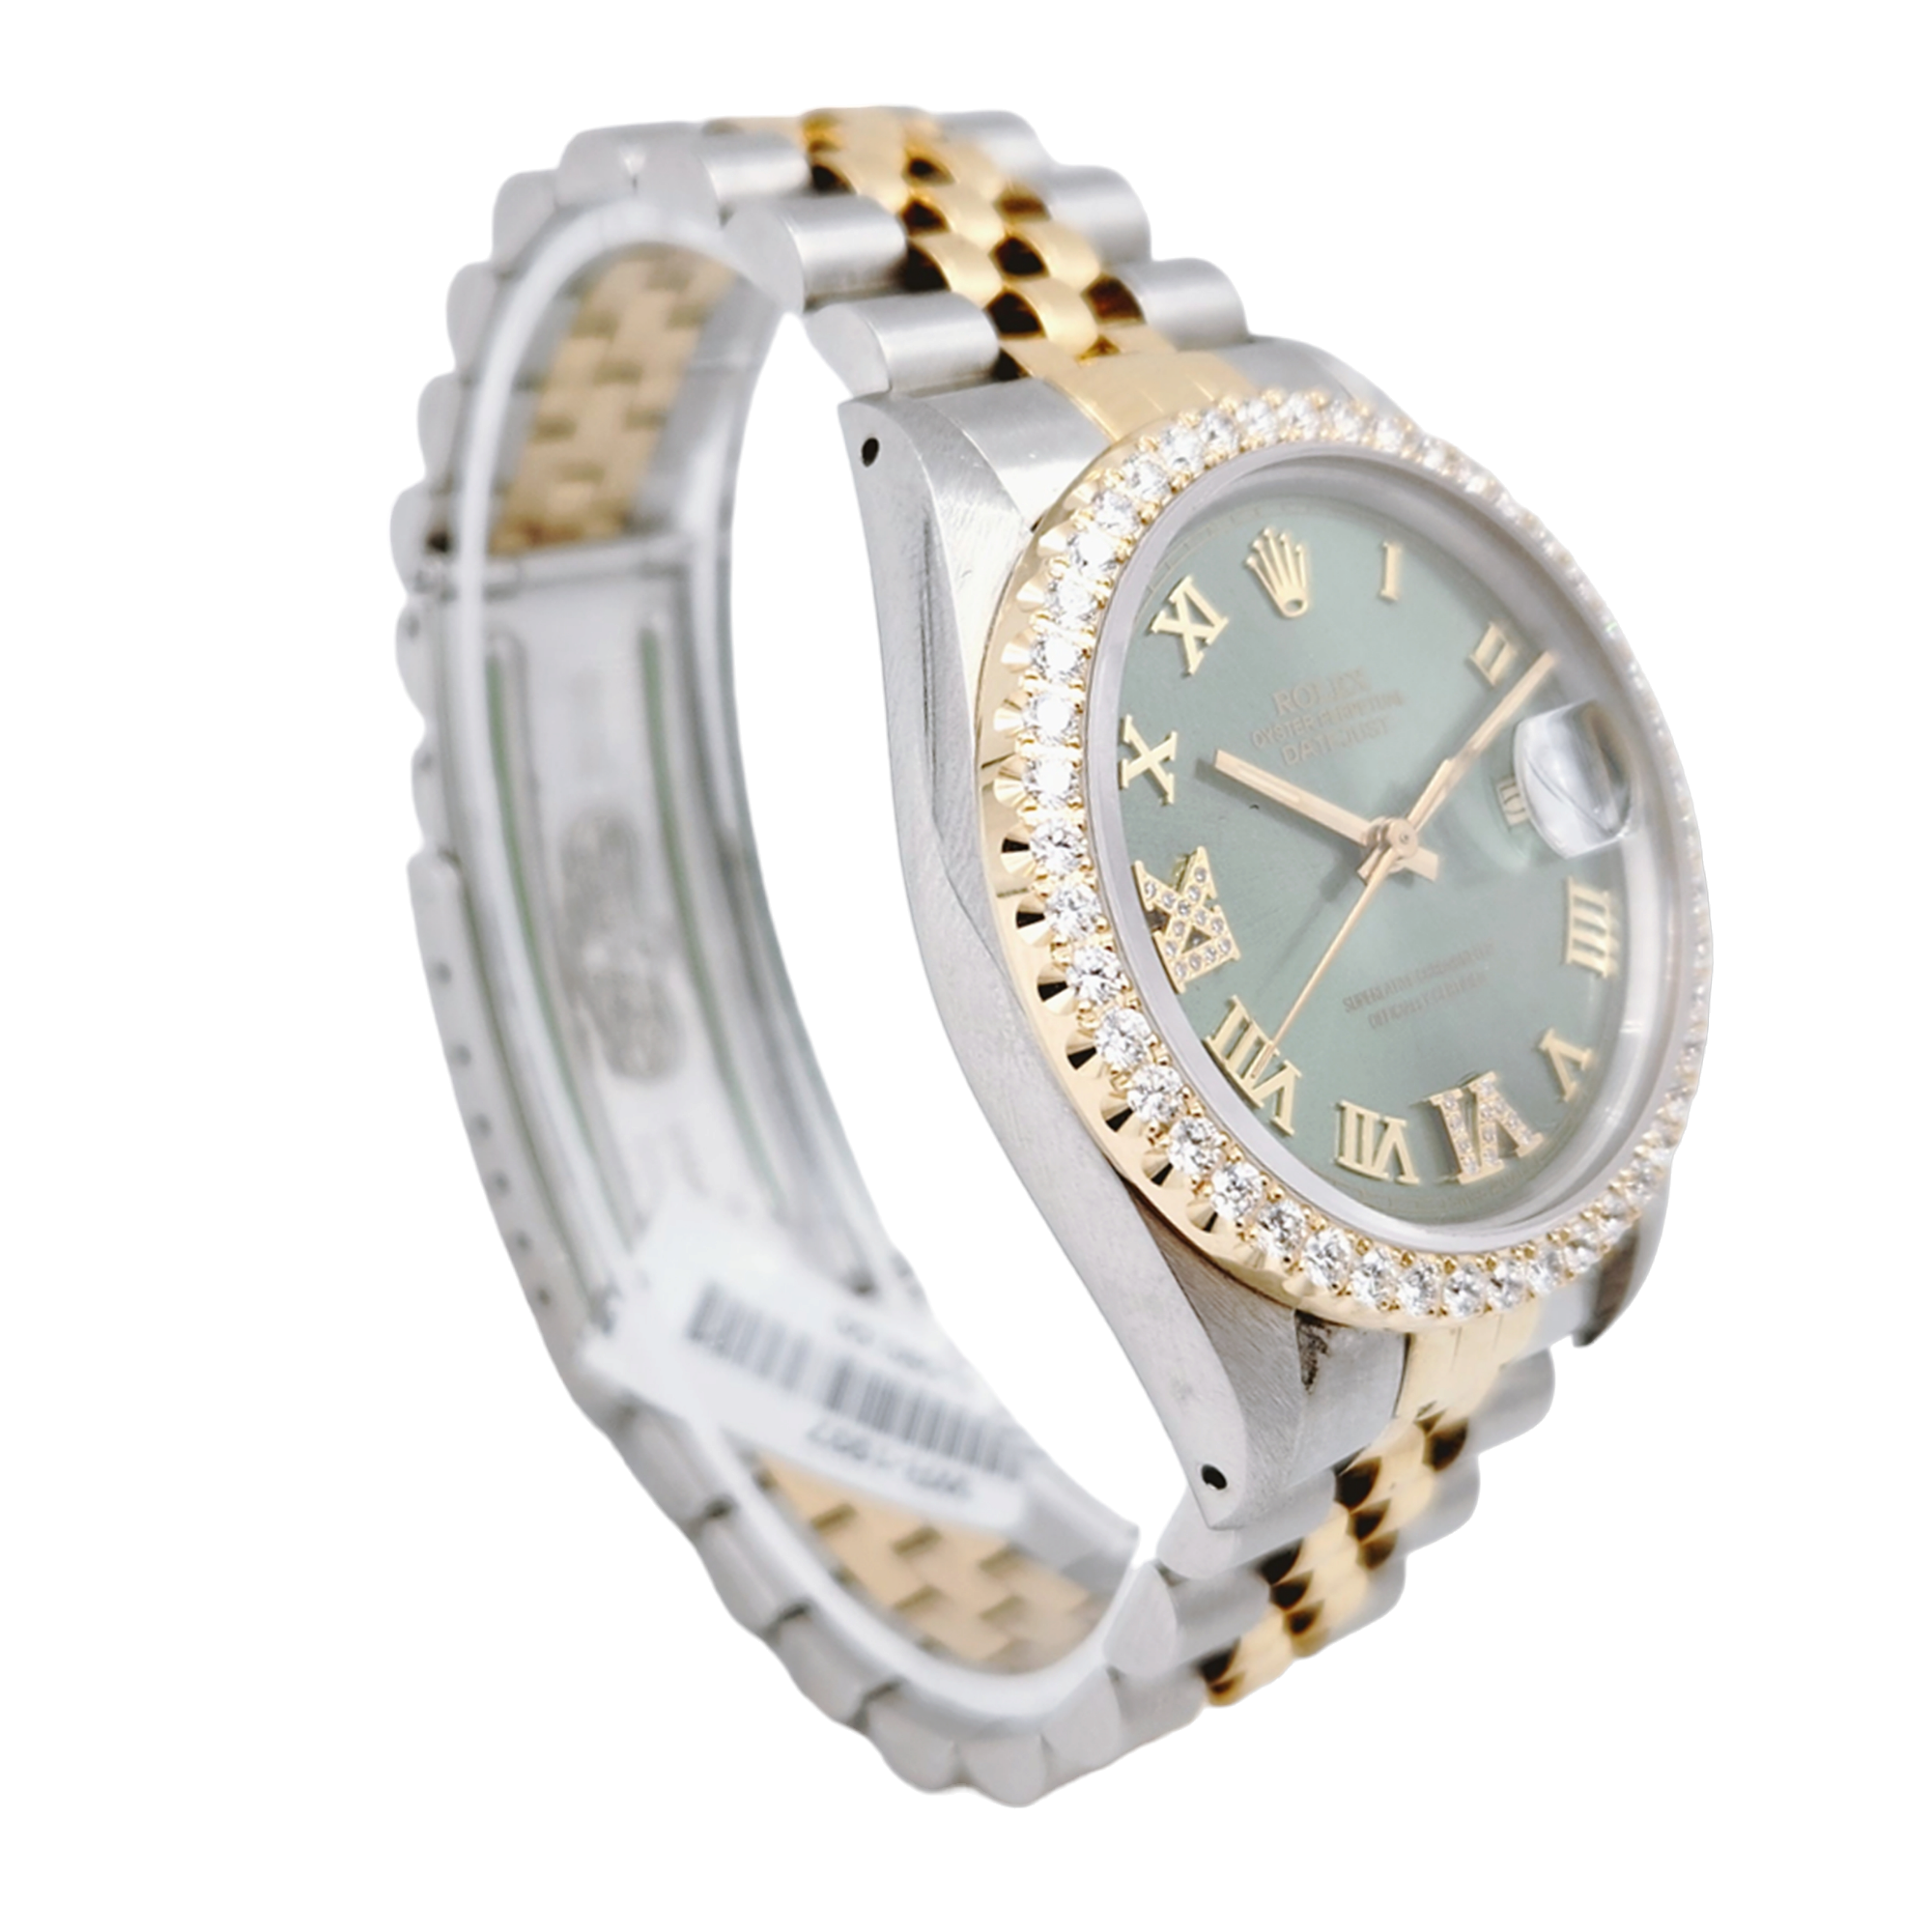 Men's Rolex 36mm DateJust Two Tone 18K Yellow Gold / Stainless Steel Watch with Green Dial and Diamond Bezel. (Pre-Owned 16013)